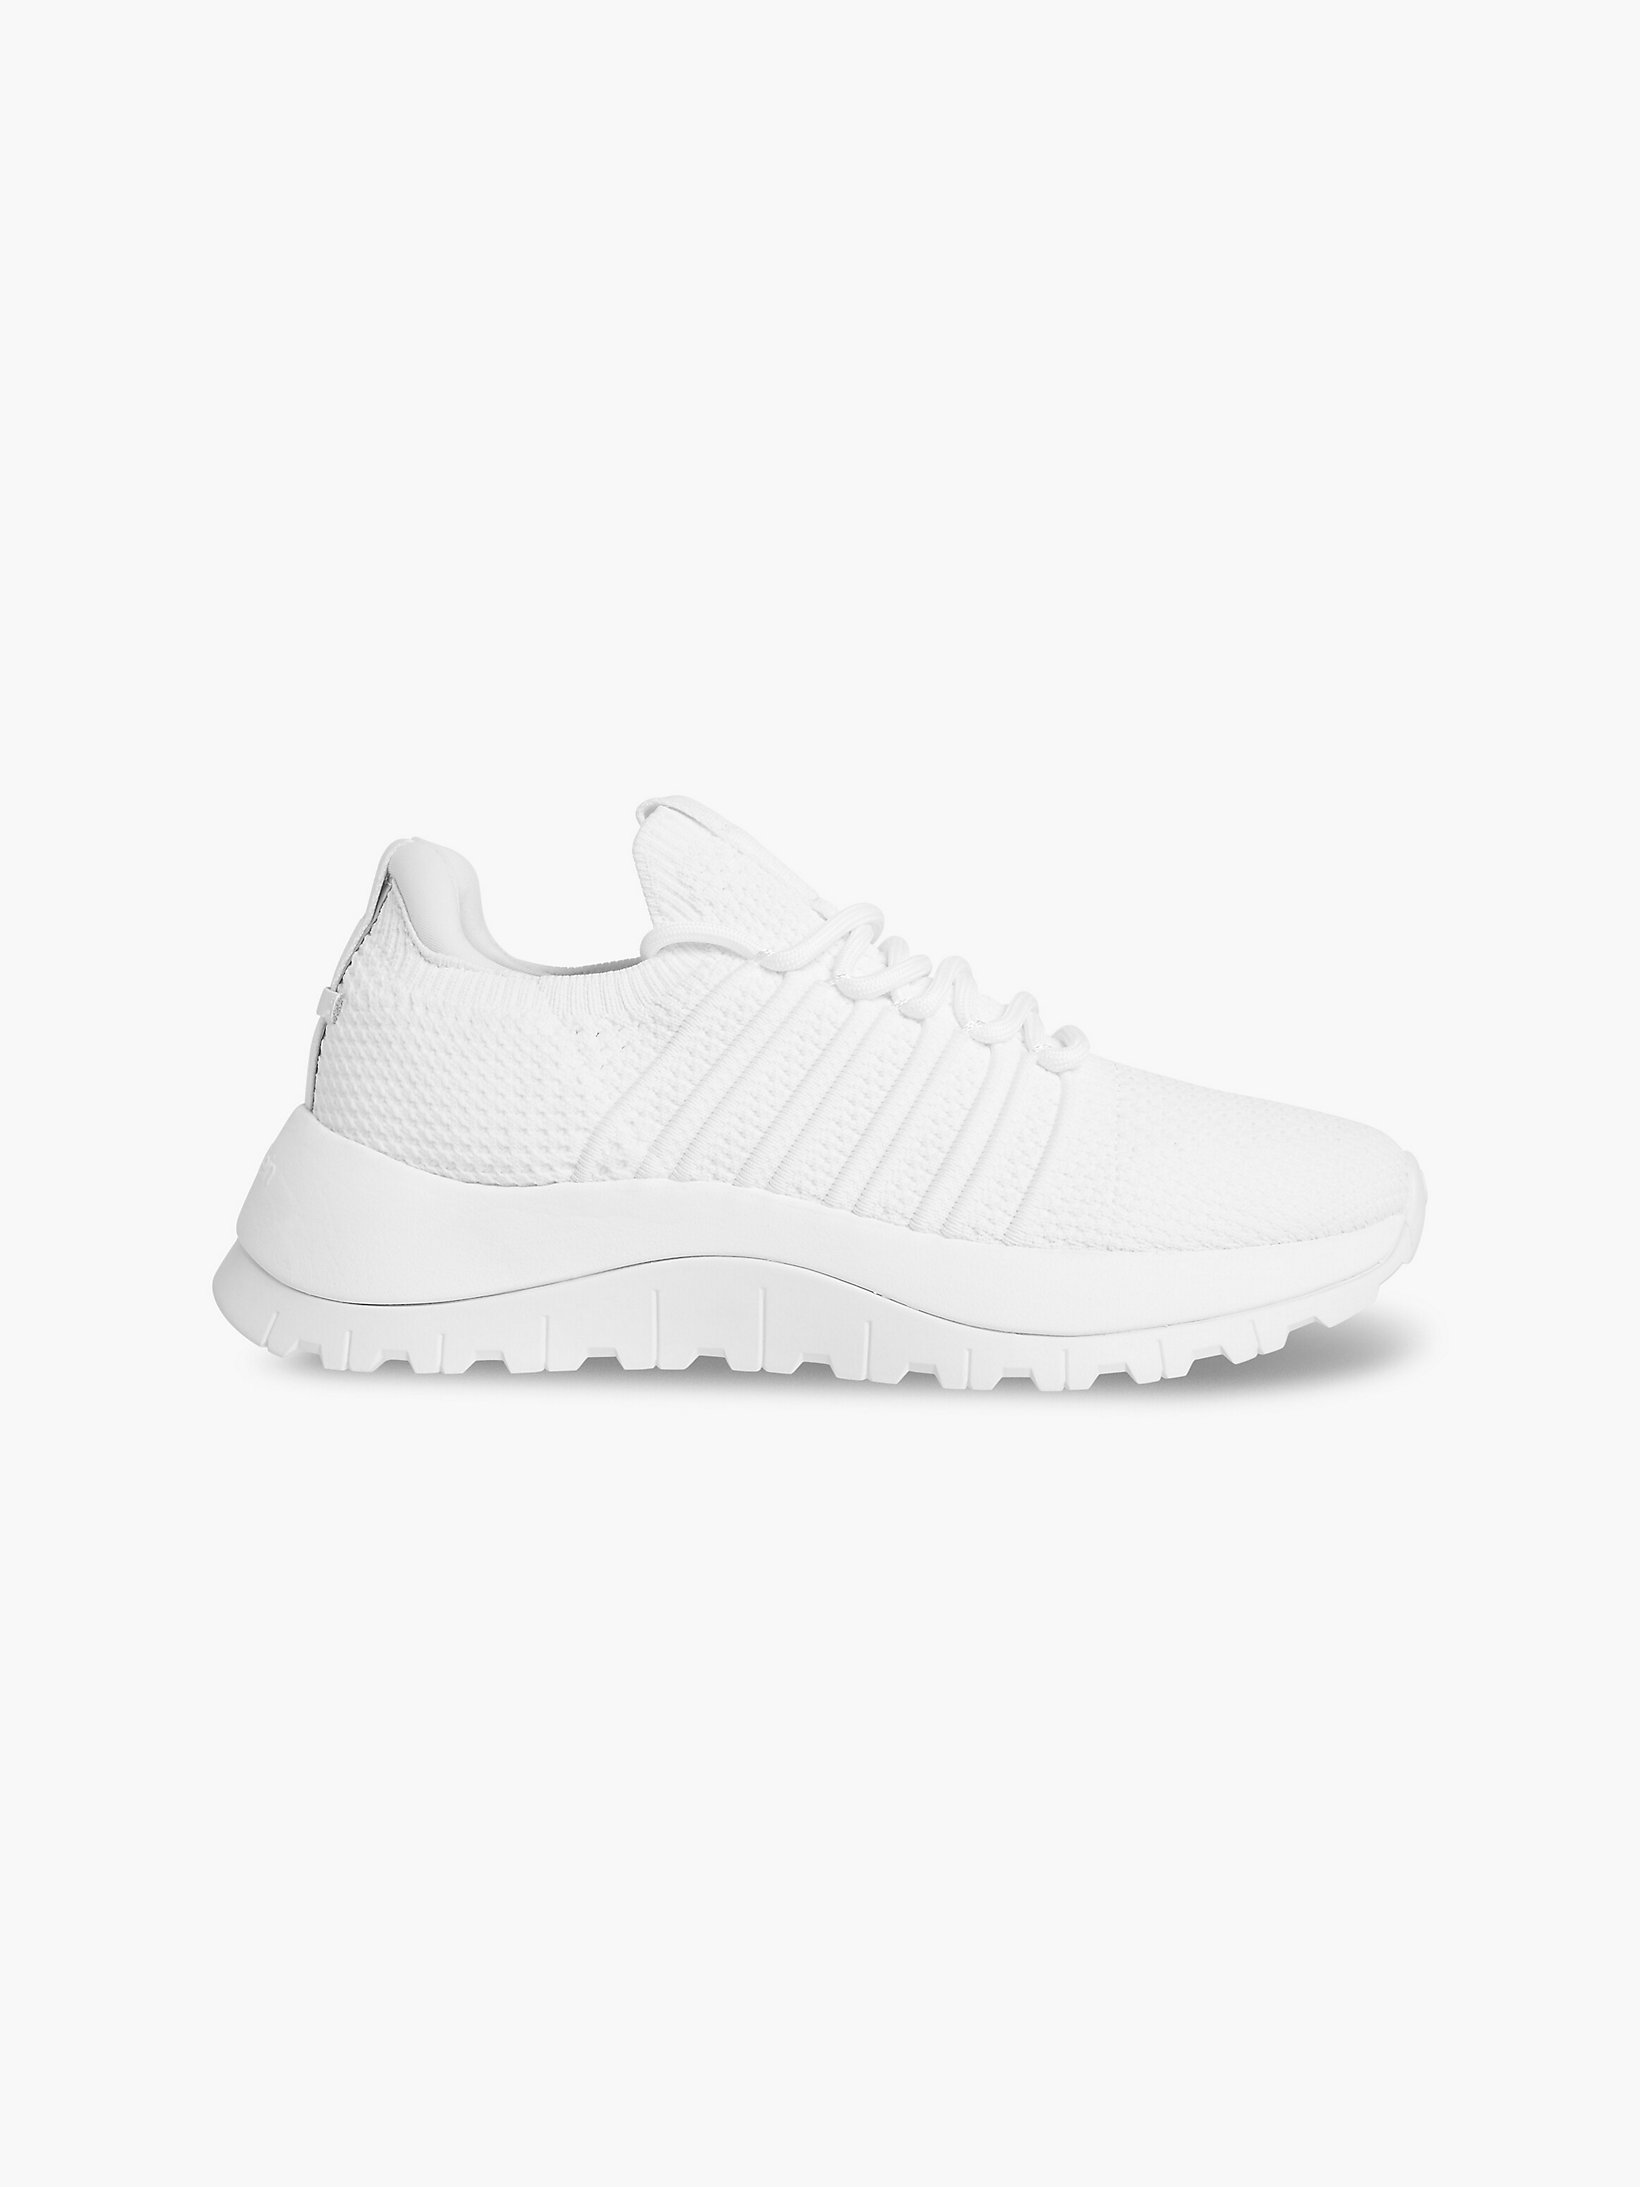 CK White Recycled Knit Trainers undefined women Calvin Klein